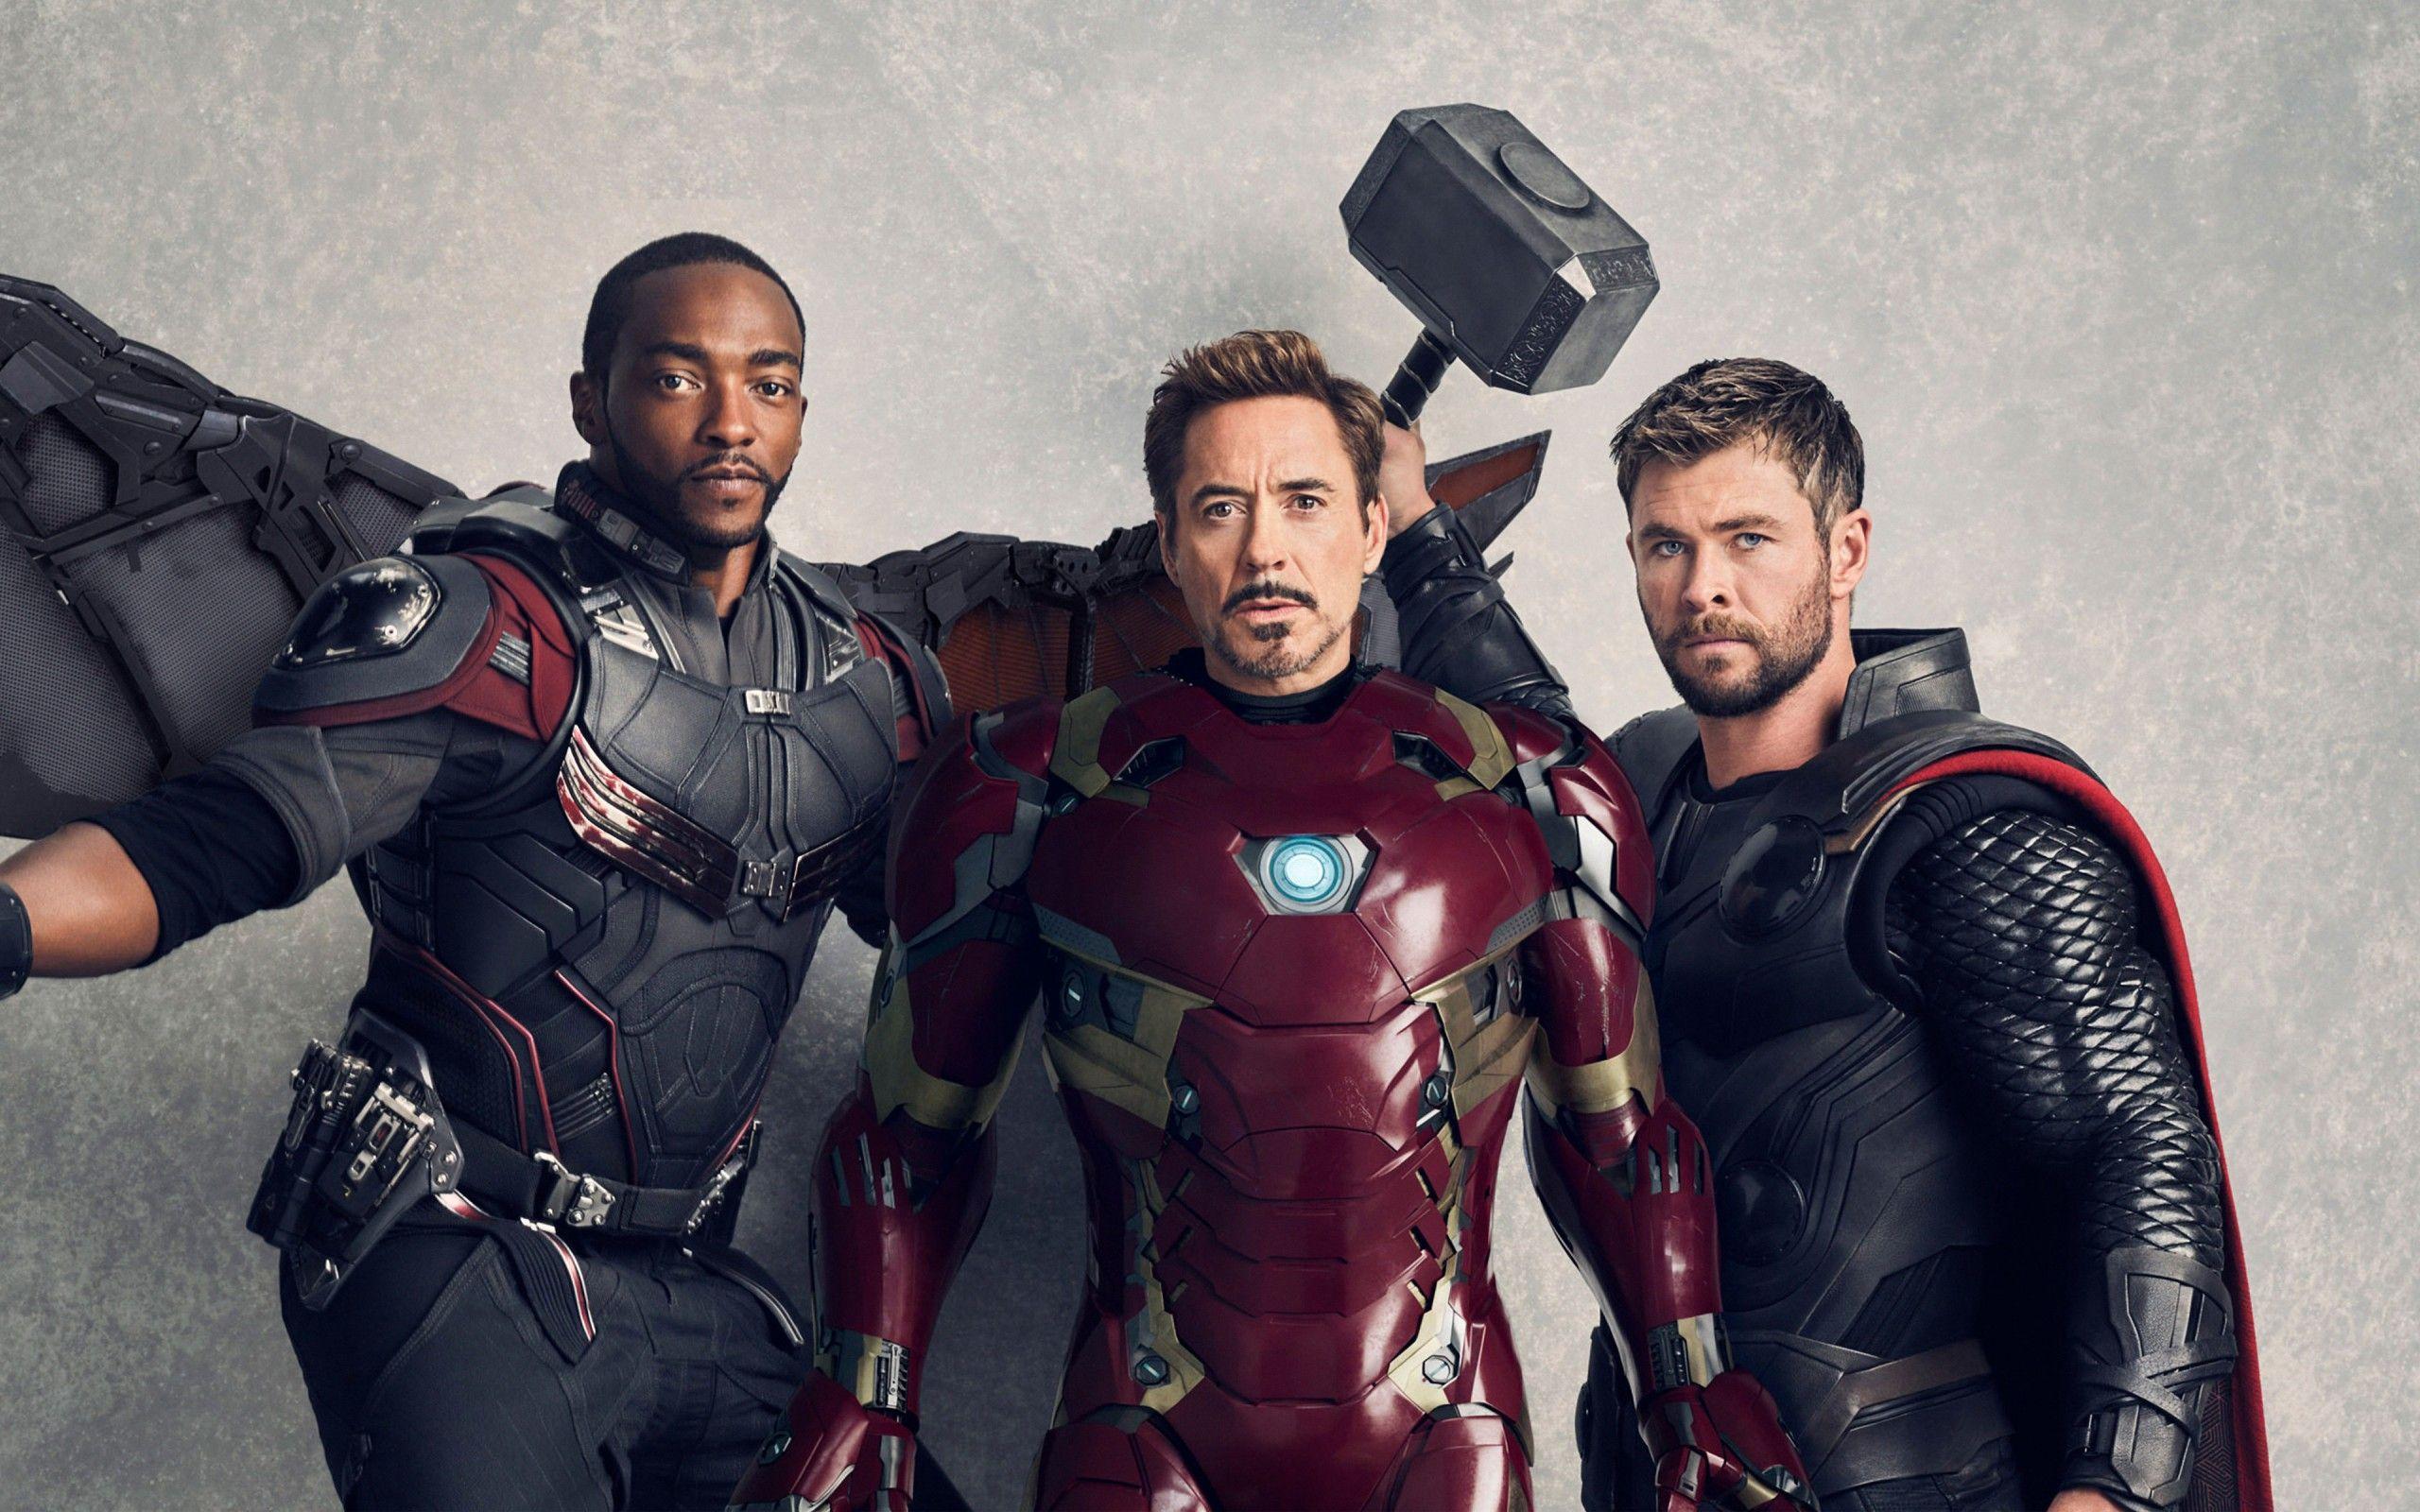 Does the New Iron Man Armor Have Ties to Black Panther?